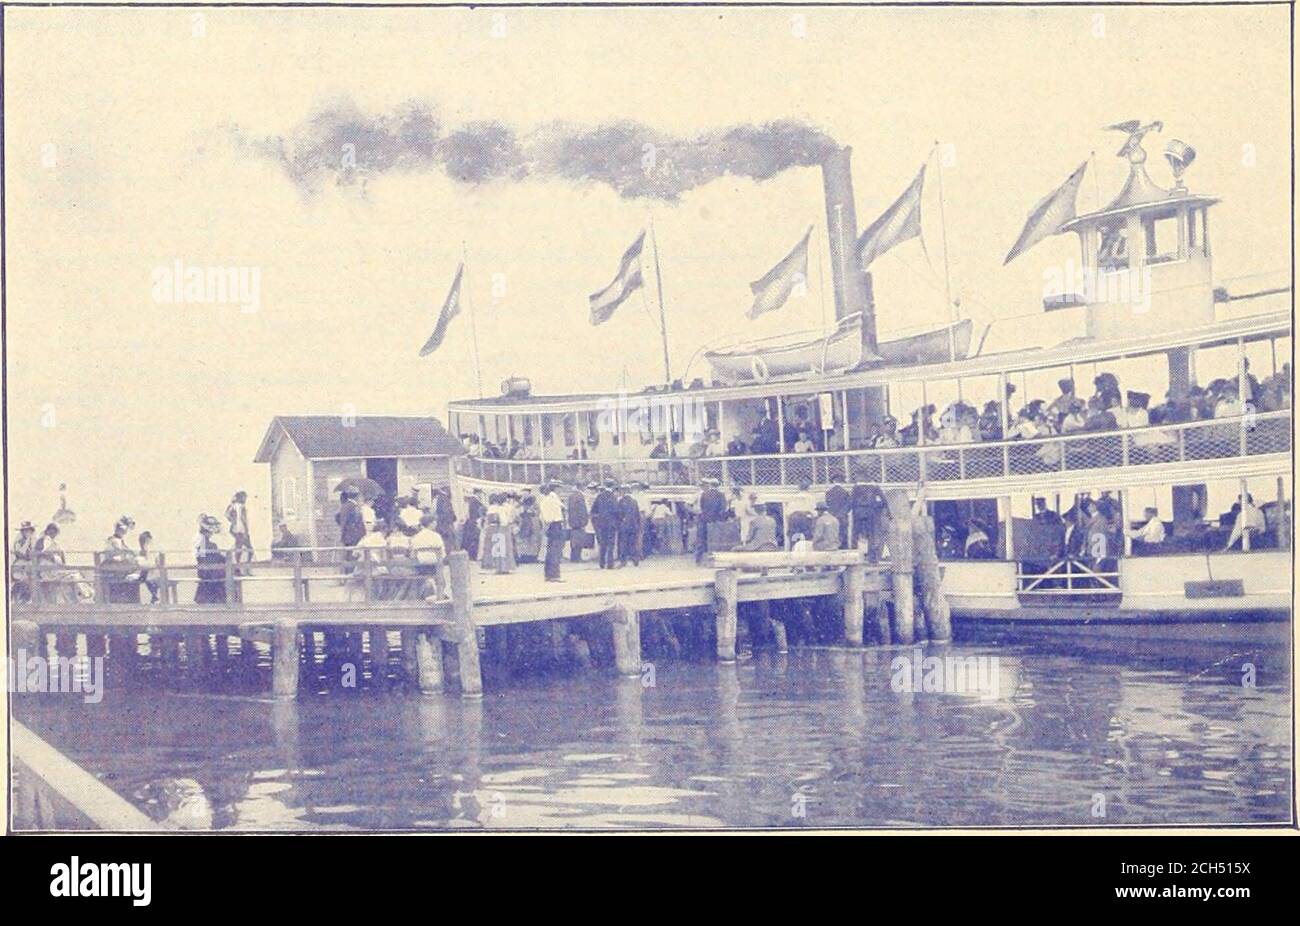 . Special excursions to Chautauqua via the picturesque Erie railroad; July 8 and July 29, 1904 . eraLl Agent, Passenger Department, 416 Wadnut Street, Cinclnna^tl, O.O. W. JORDAN, New England Passenger Agent. 207 Washington Street, Boston, Ma^ss.H. E. HUNTINGTON, Division Pa^ssenger Agent, Elmlra., N. Y.F. H. GAR.FIELD, Division PaLSsenger Agent, Ja^mestown, N. Y.W. B. LINDSAY, City Passenger Agent, 399 Broa^dwa^y. New York.GEO. H. STAGG, Pa^ssenger Agent, 399 Broa^dwa-y, New York. E. H. BARTO, Traveling PaLSsenger Agent, CKaLcnbers Street Station, New^ York. F. S. HOWARD, Tra^vellng PaLSsenge Stock Photo